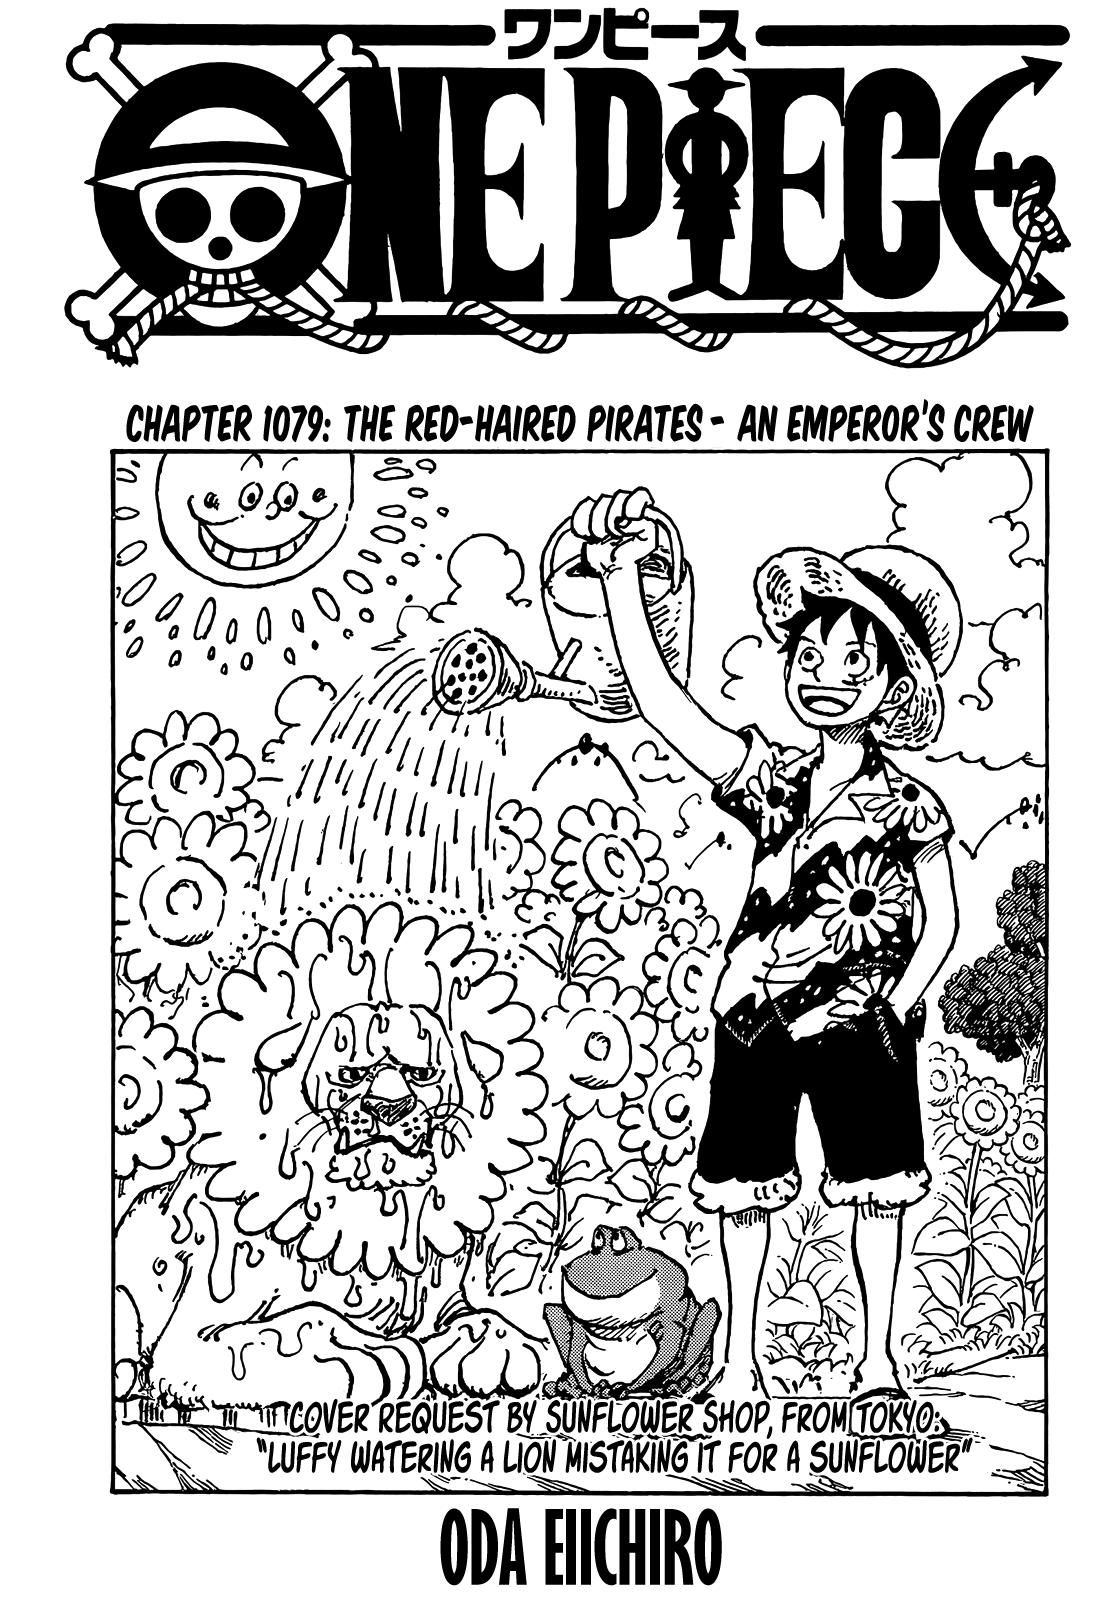 One Piece chapter 1045 release details as spoilers hint Luffy